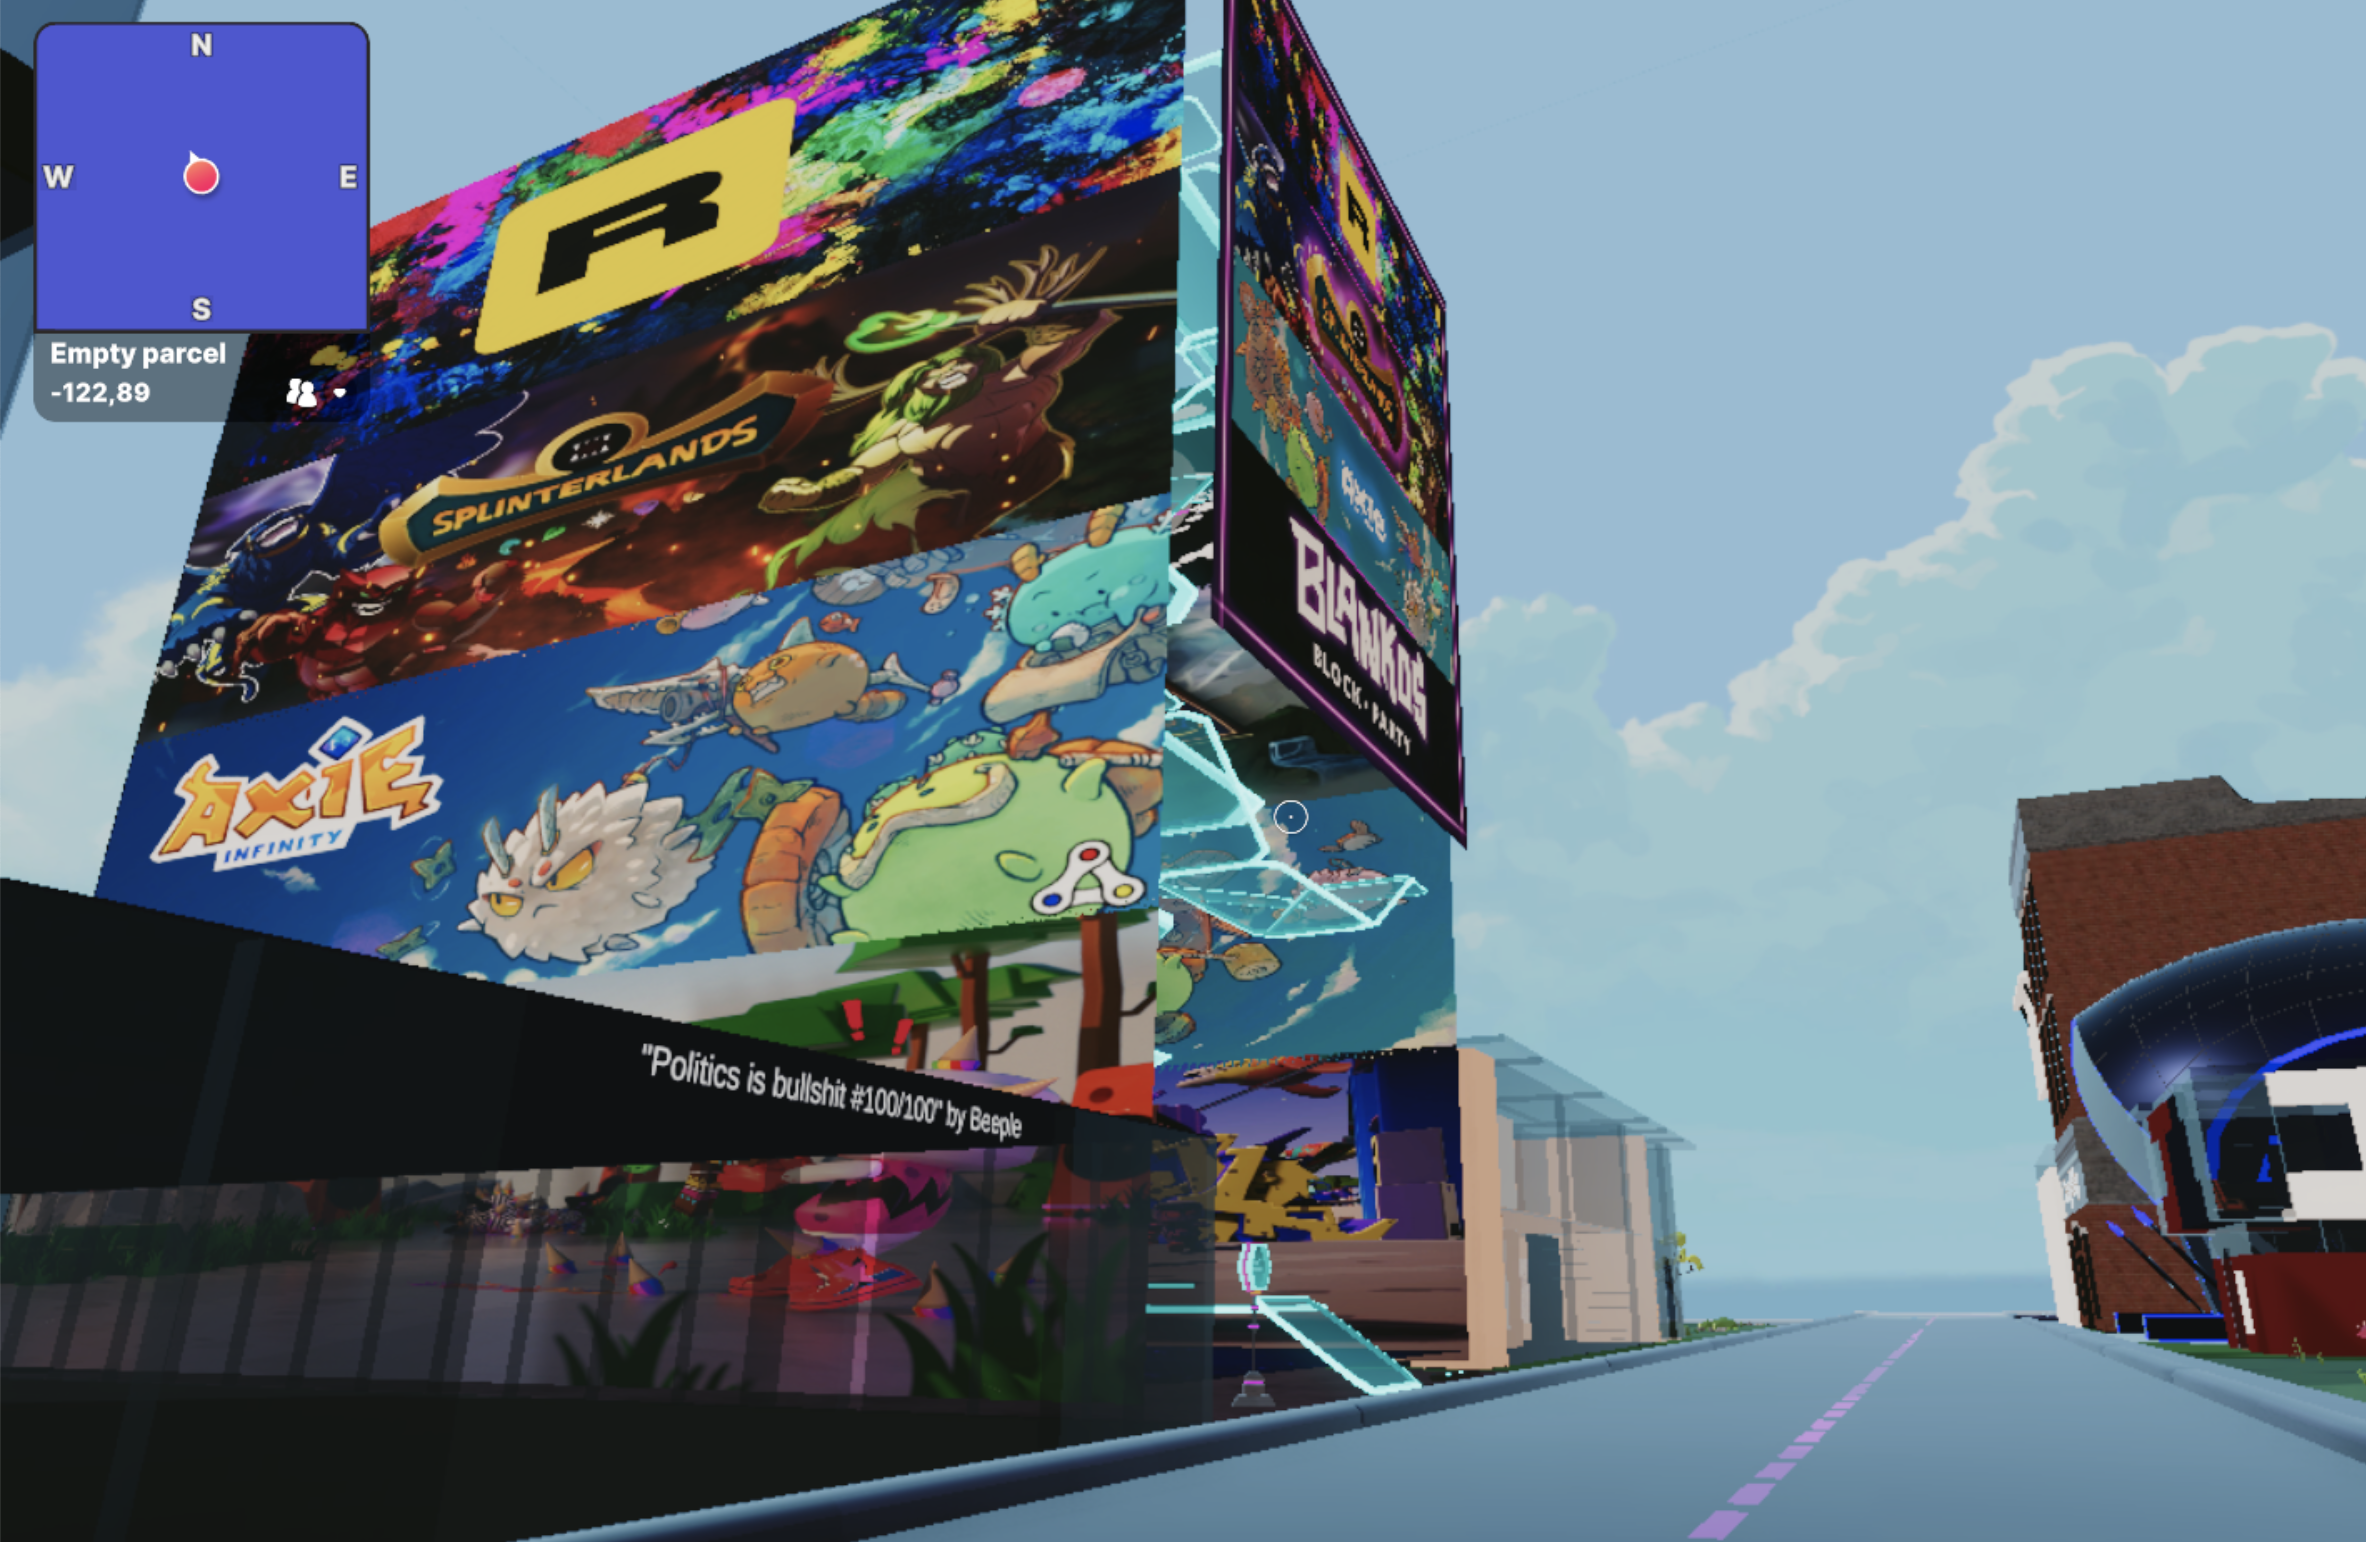 The Galleries High Street in Decentraland, Sep 2021